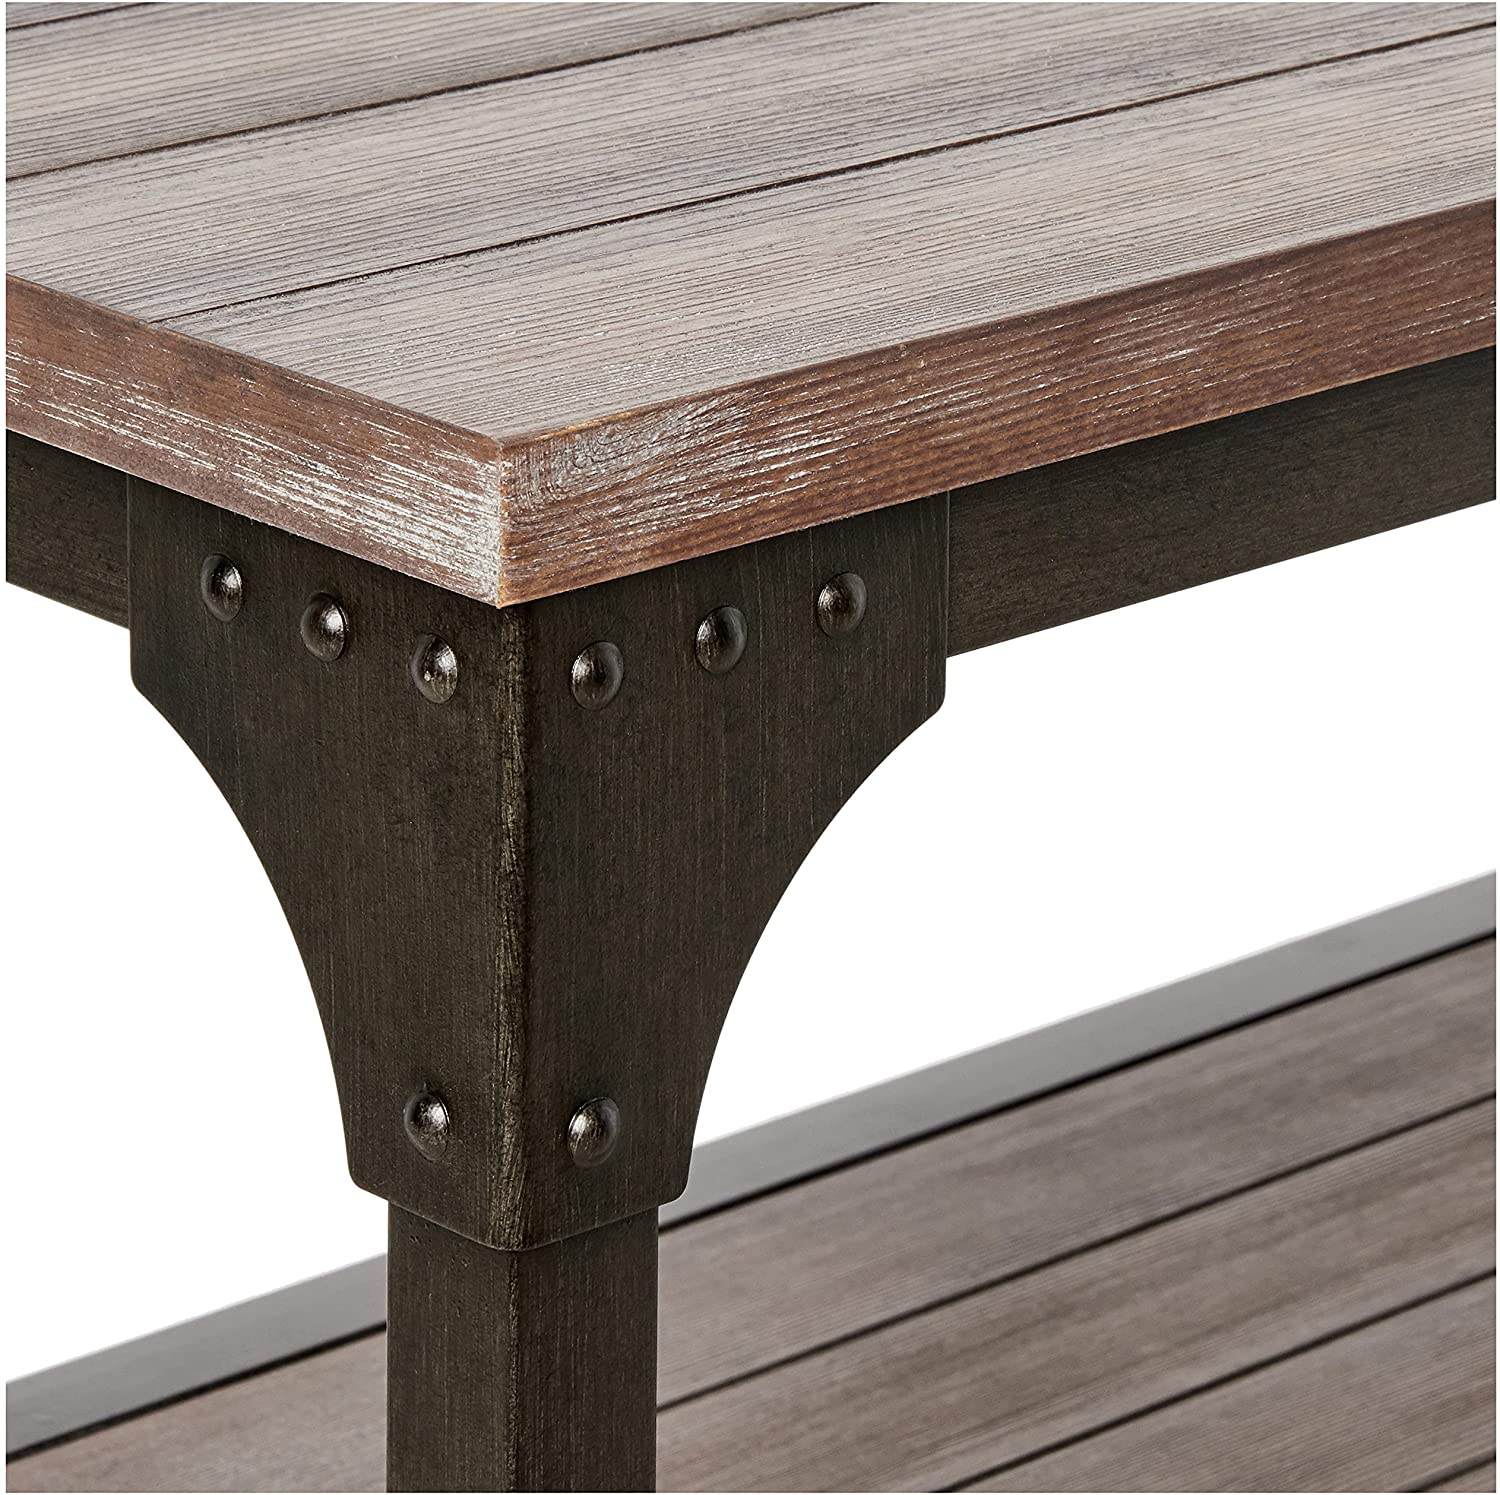 60" X 16" X 30" Weathered Oak And Antique Silver Console Table